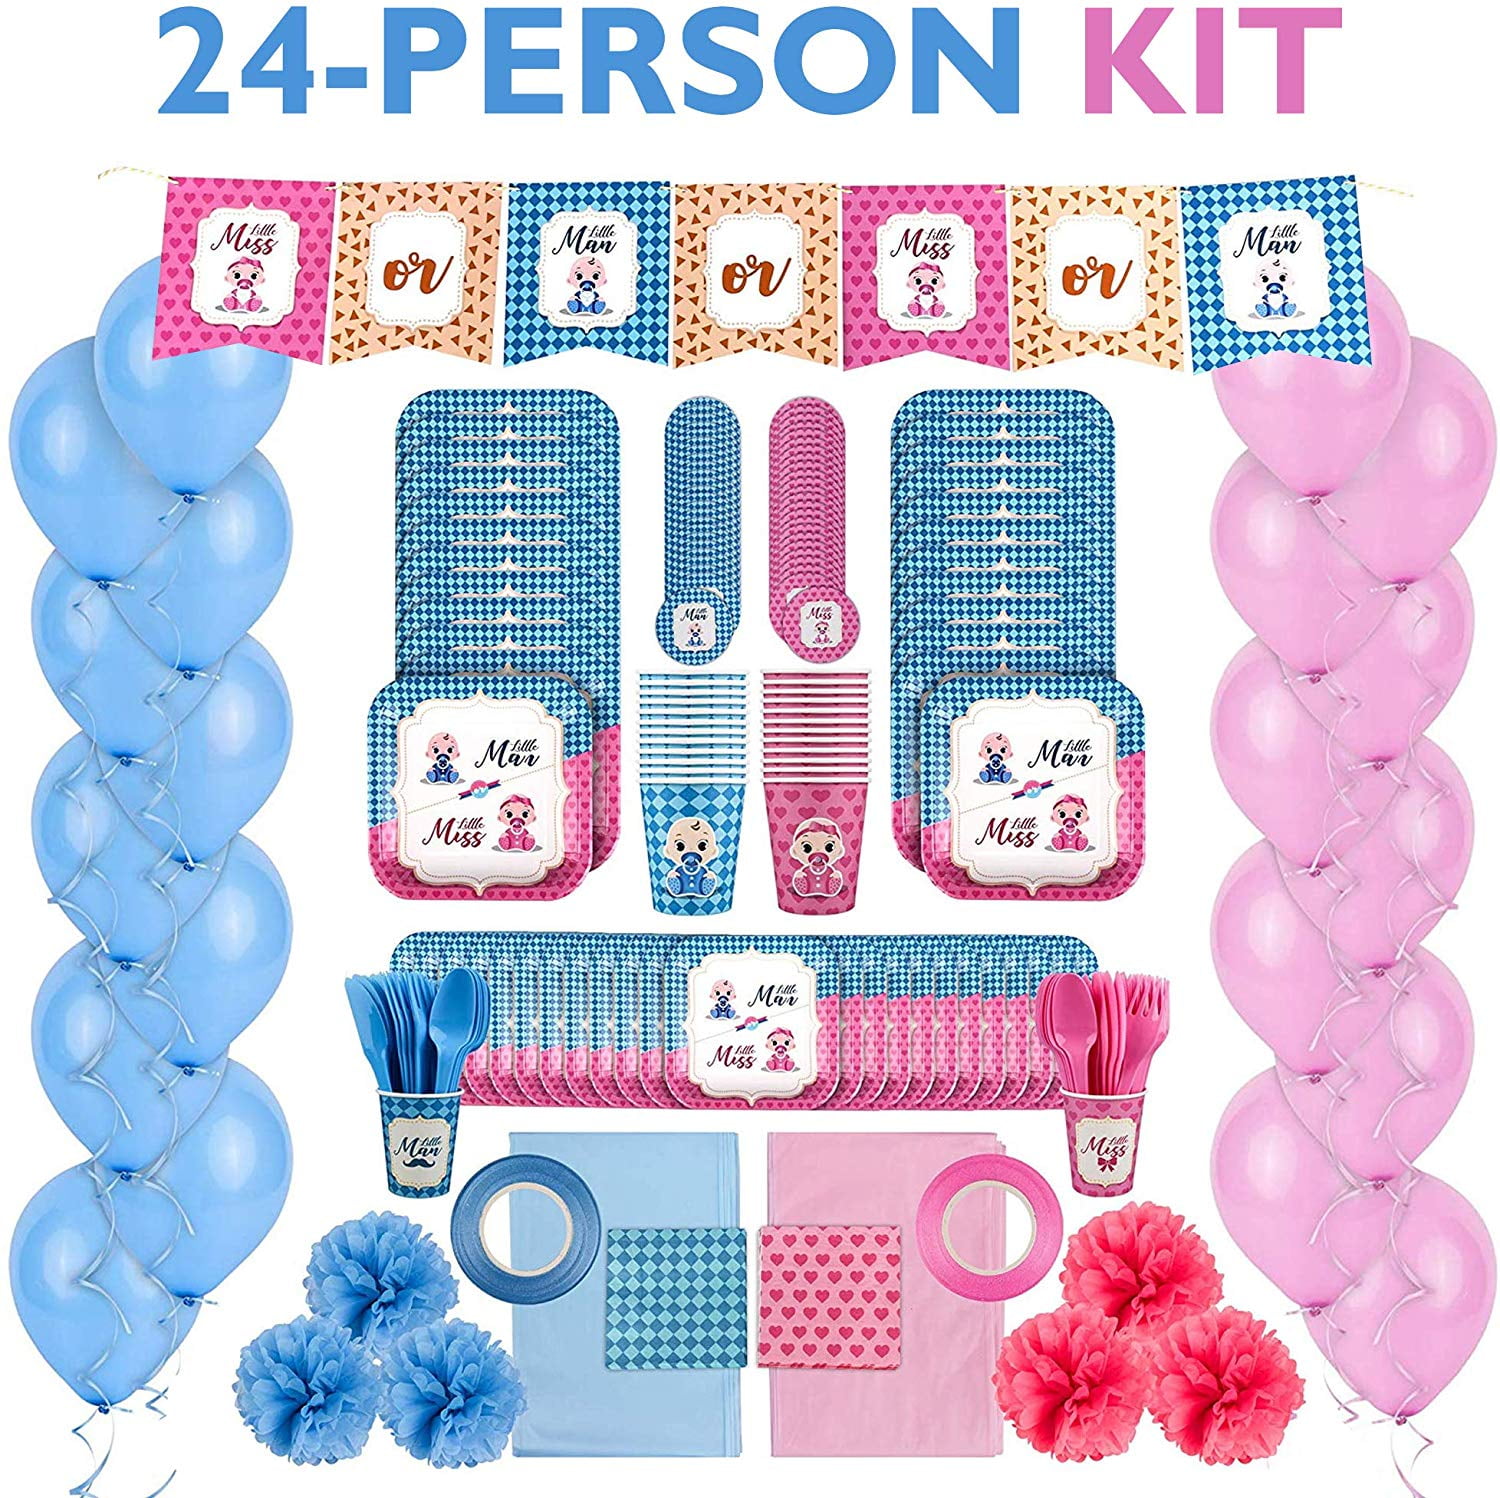 Cute Gender Reveal Ideas for Party Decoration Tablecloth Total 58pcs Complete Pack Include Boy or Girl Banner Decorlife Baby Gender Reveal Party Supplies Serves 8